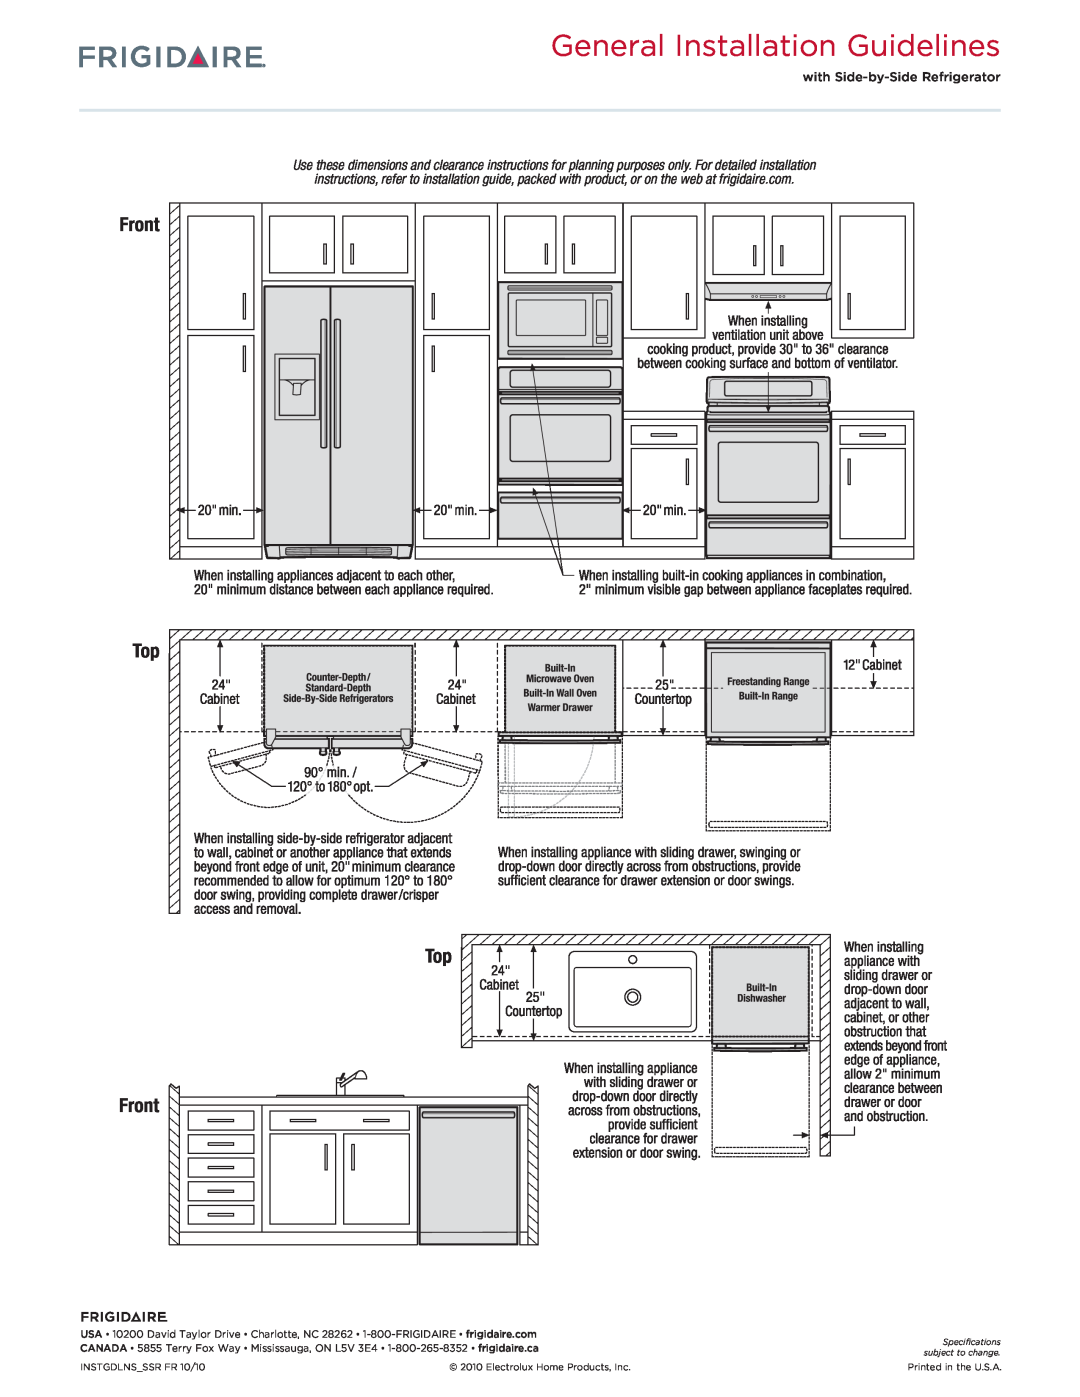 Frigidaire FFHS2313L dimensions General Installation Guidelines, Top Front 